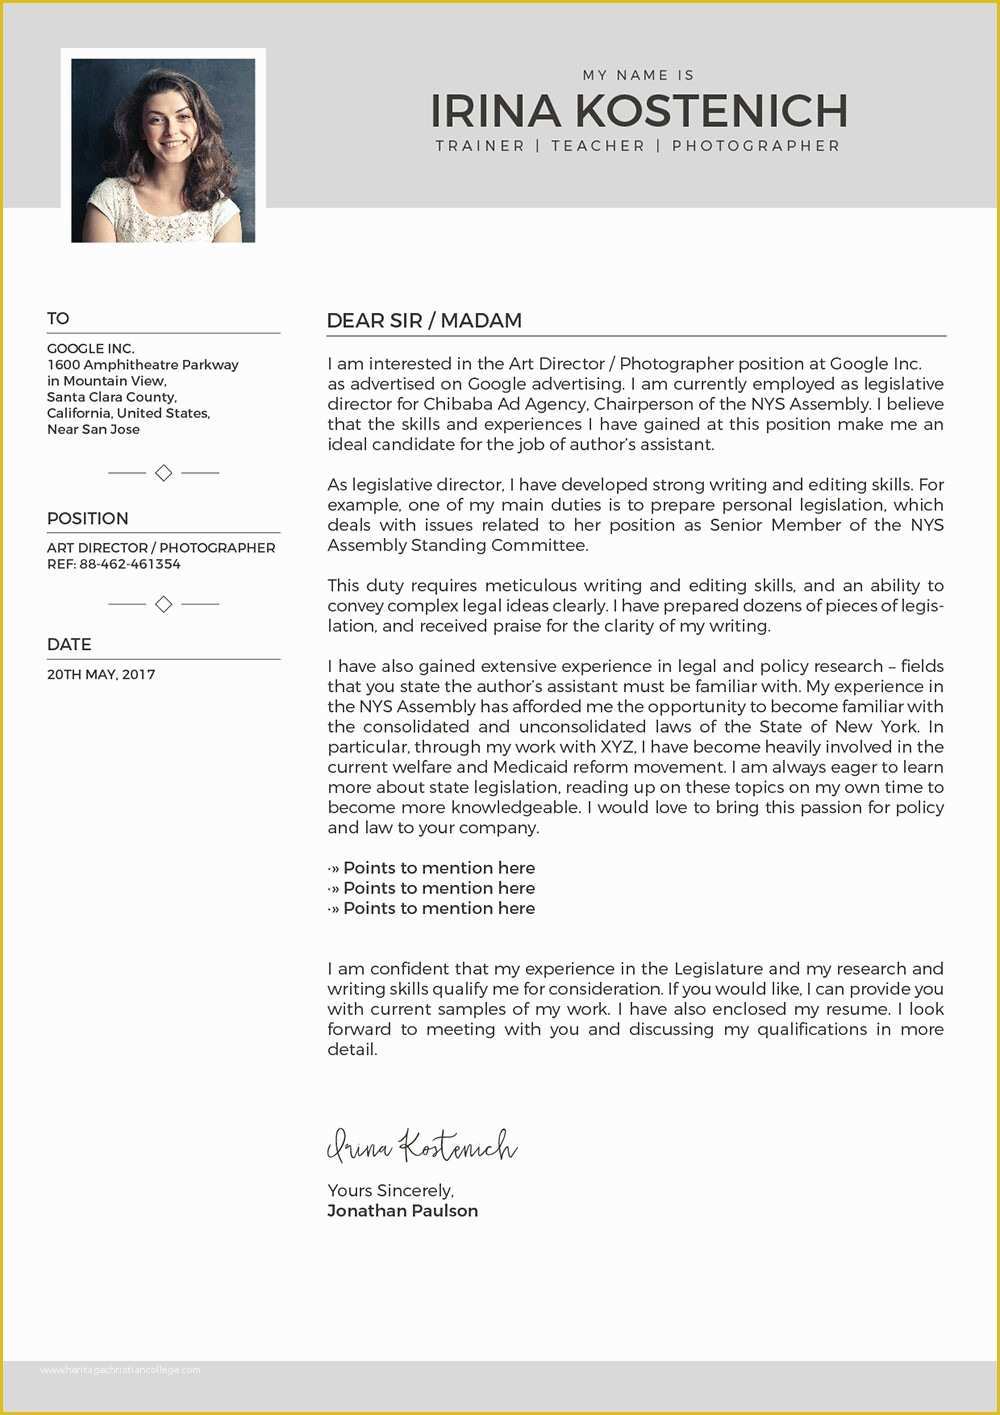 Free Modern Cover Letter Template Of Free Modern Cover Letter Template Bluemooncatering